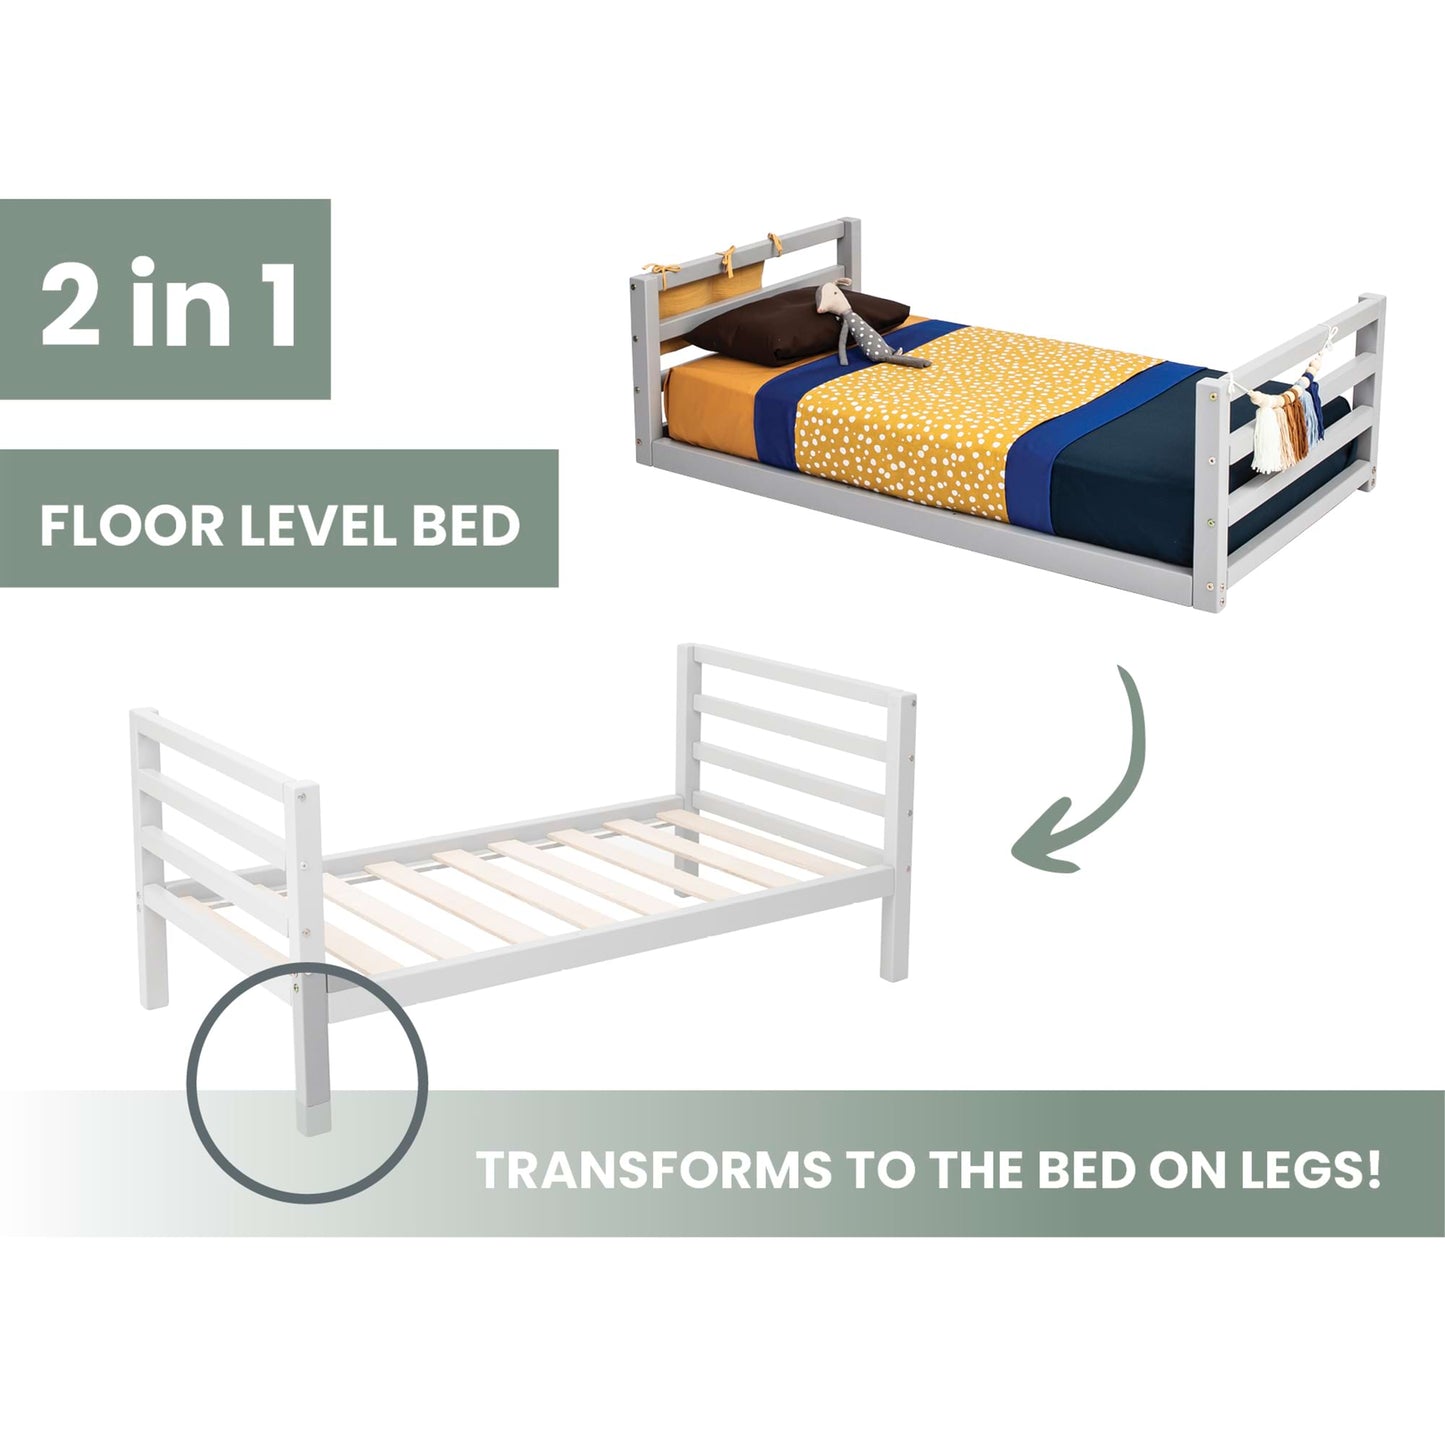 2-in-1 transformable kids' bed with a horizontal rail headboard and footboard